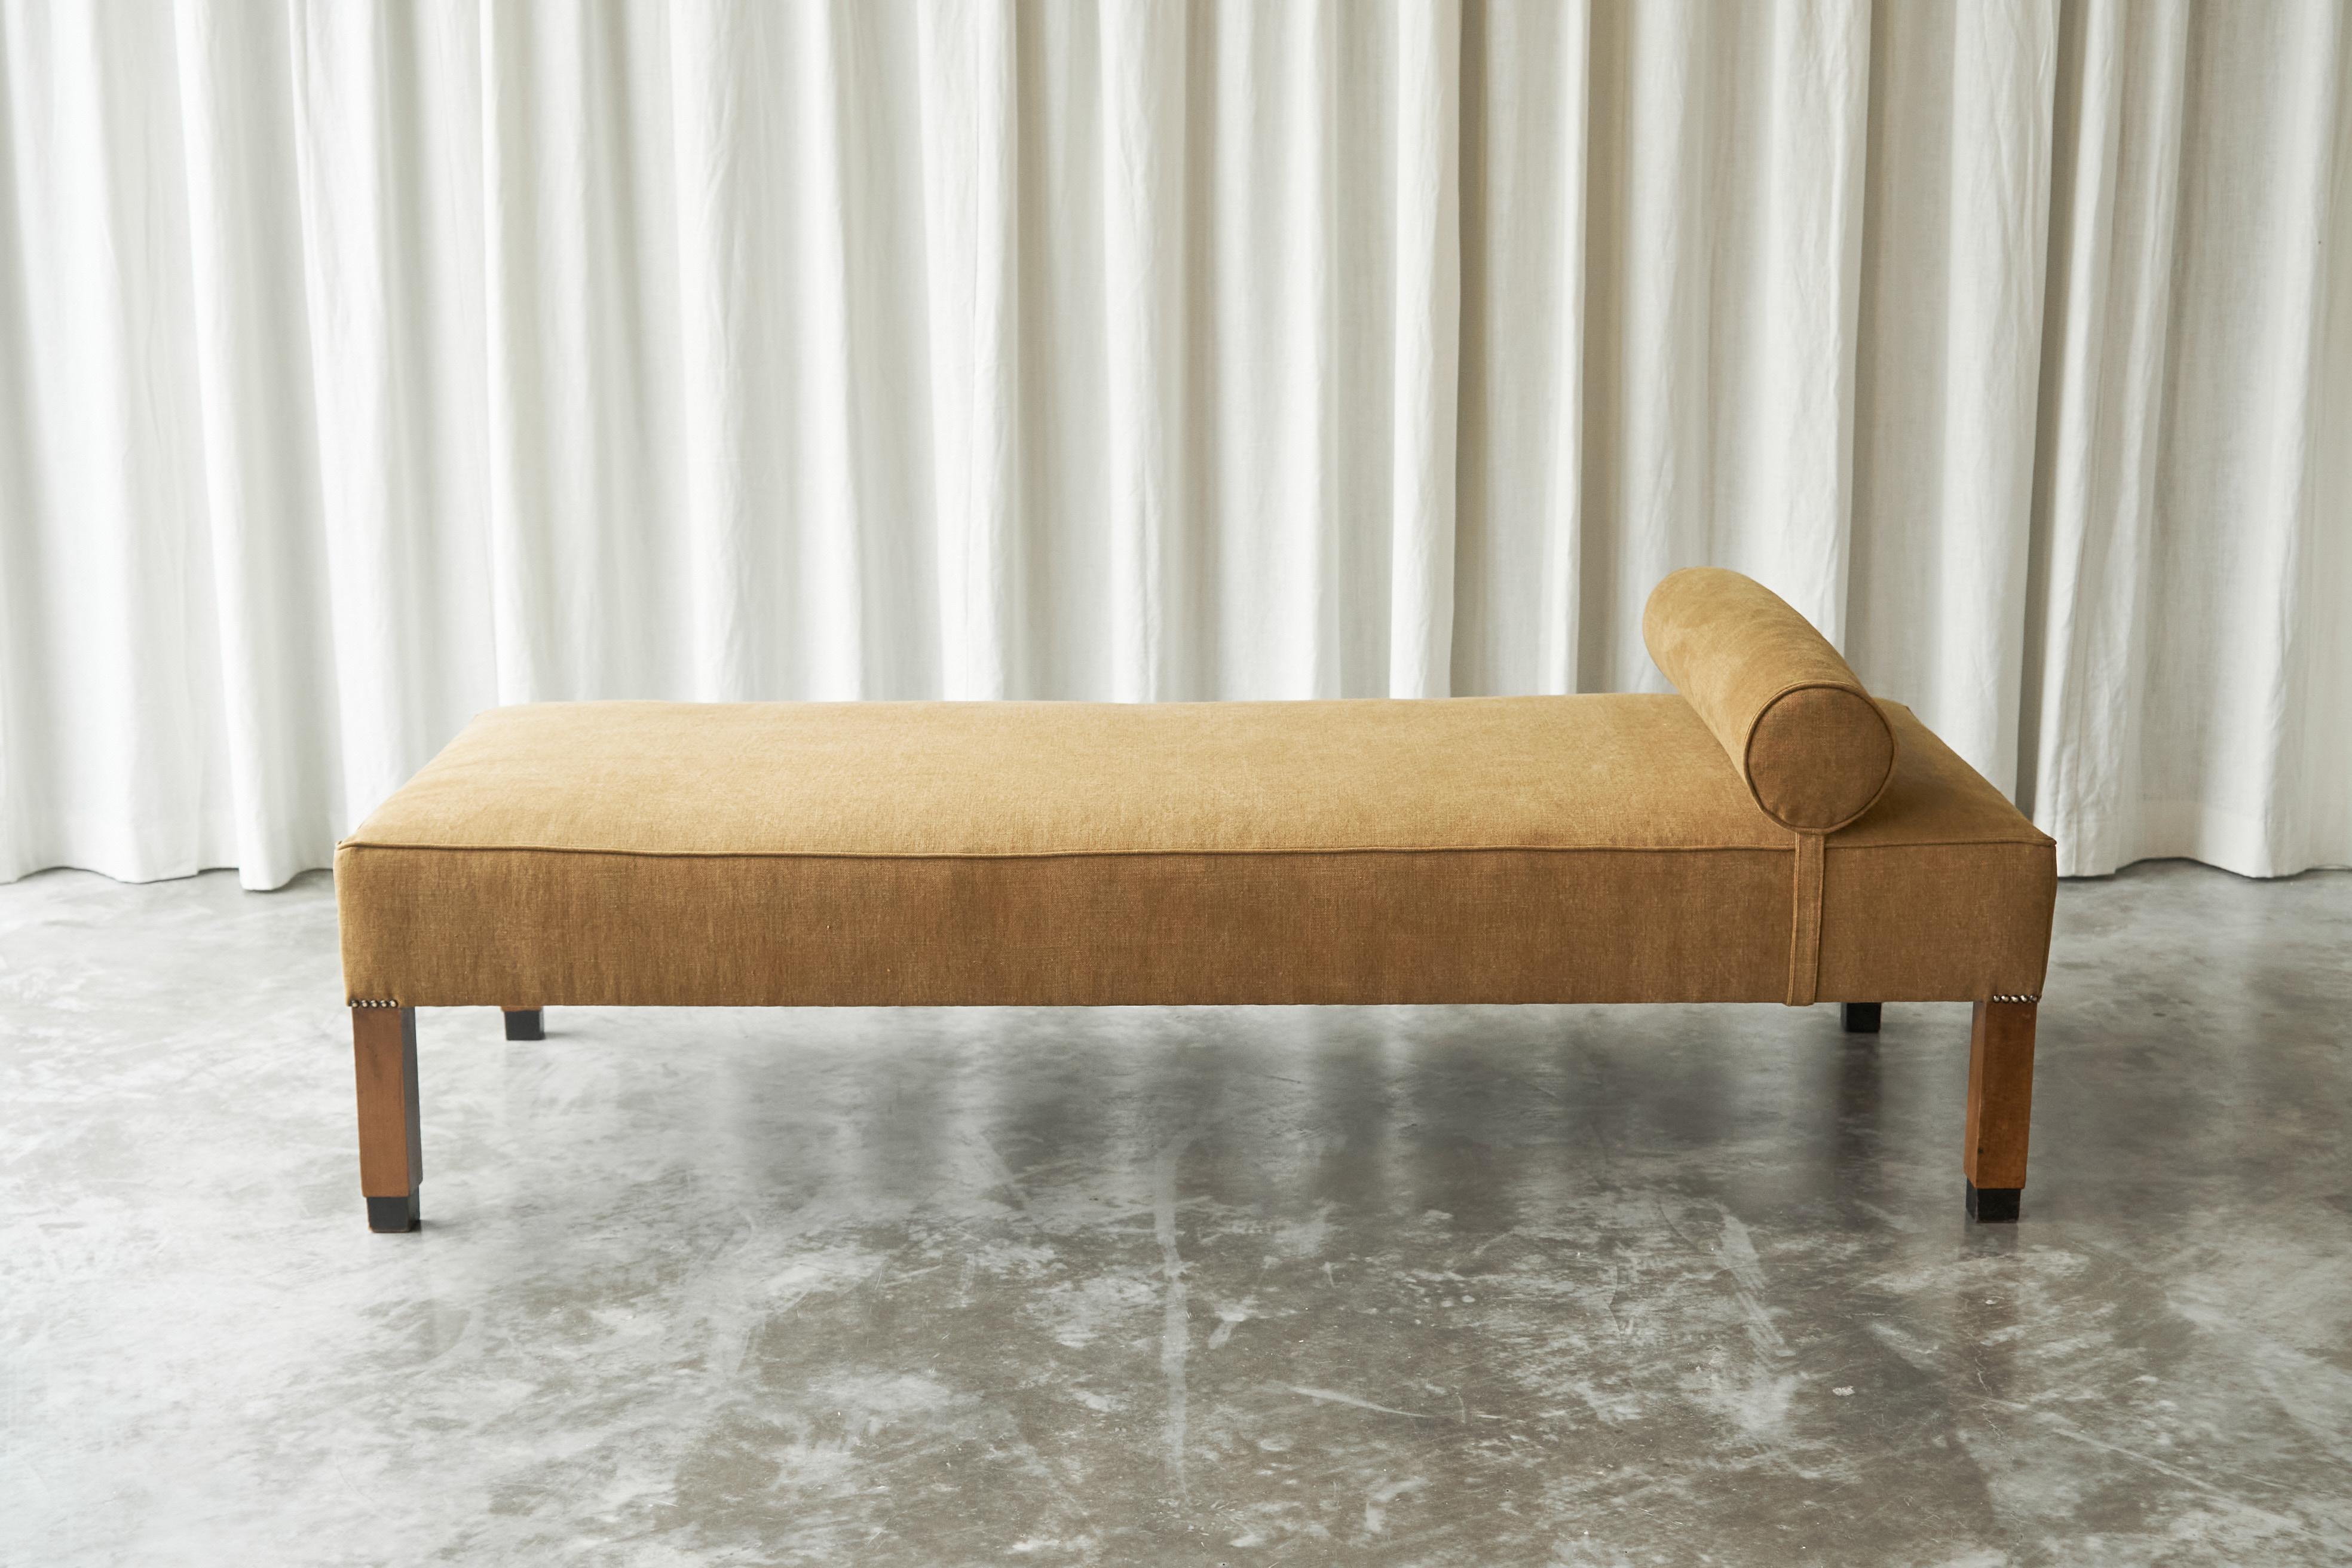 Art Deco Daybed in Stonewashed Linen, 1930s, Restored and Newly Upholstered.

This stunning 1930s Art Deco daybed shows wonderful proportions. It is well sized, with sturdy legs and elegant feet. The characteristic copper nails make a nice detail.